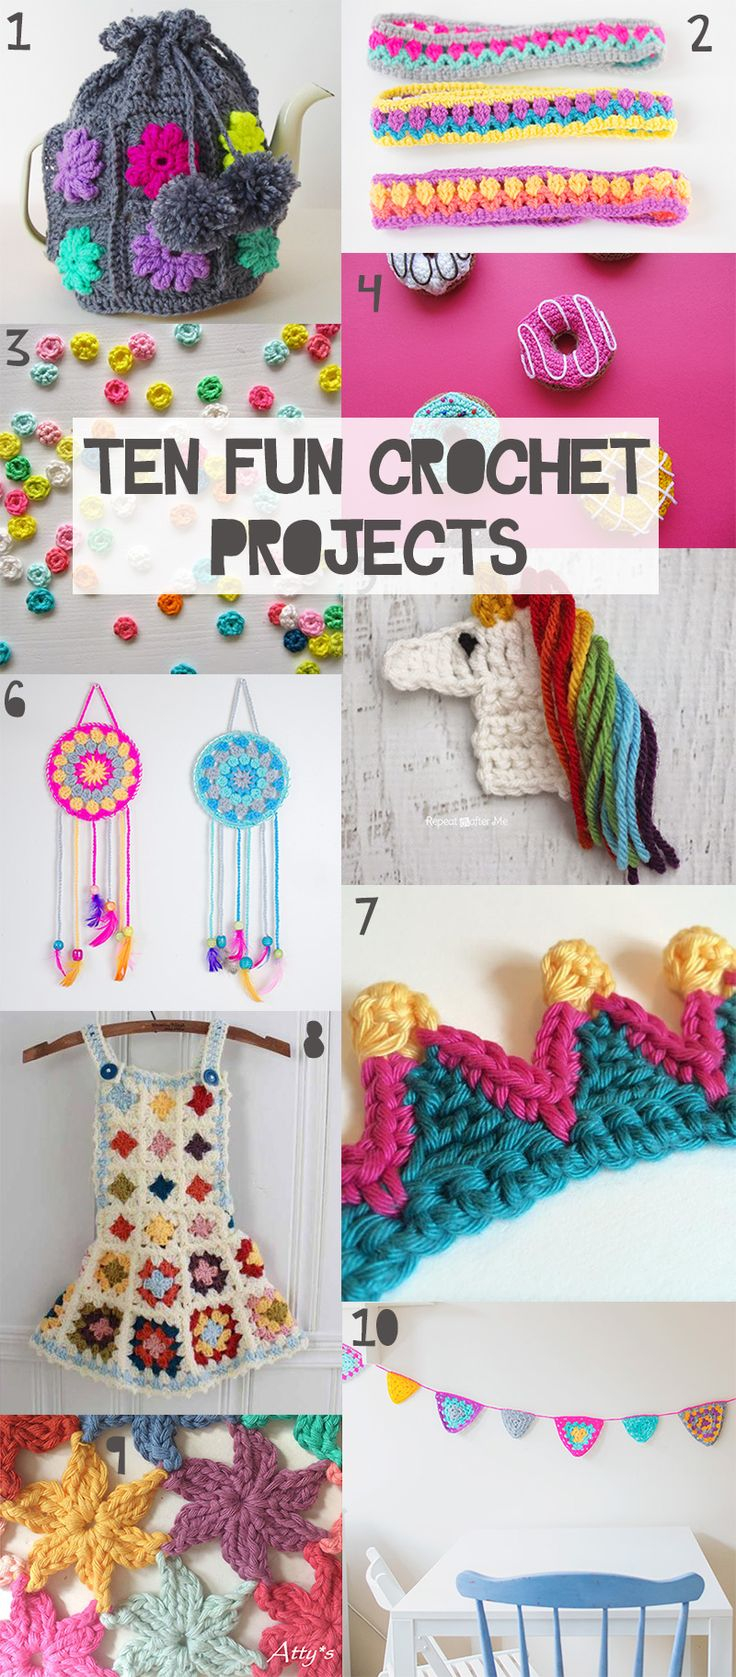 Begginer Crochet Projects Easy Patterns Chic Easy Fast Crochet Patterns Ten Fun Crochet Projects Great For